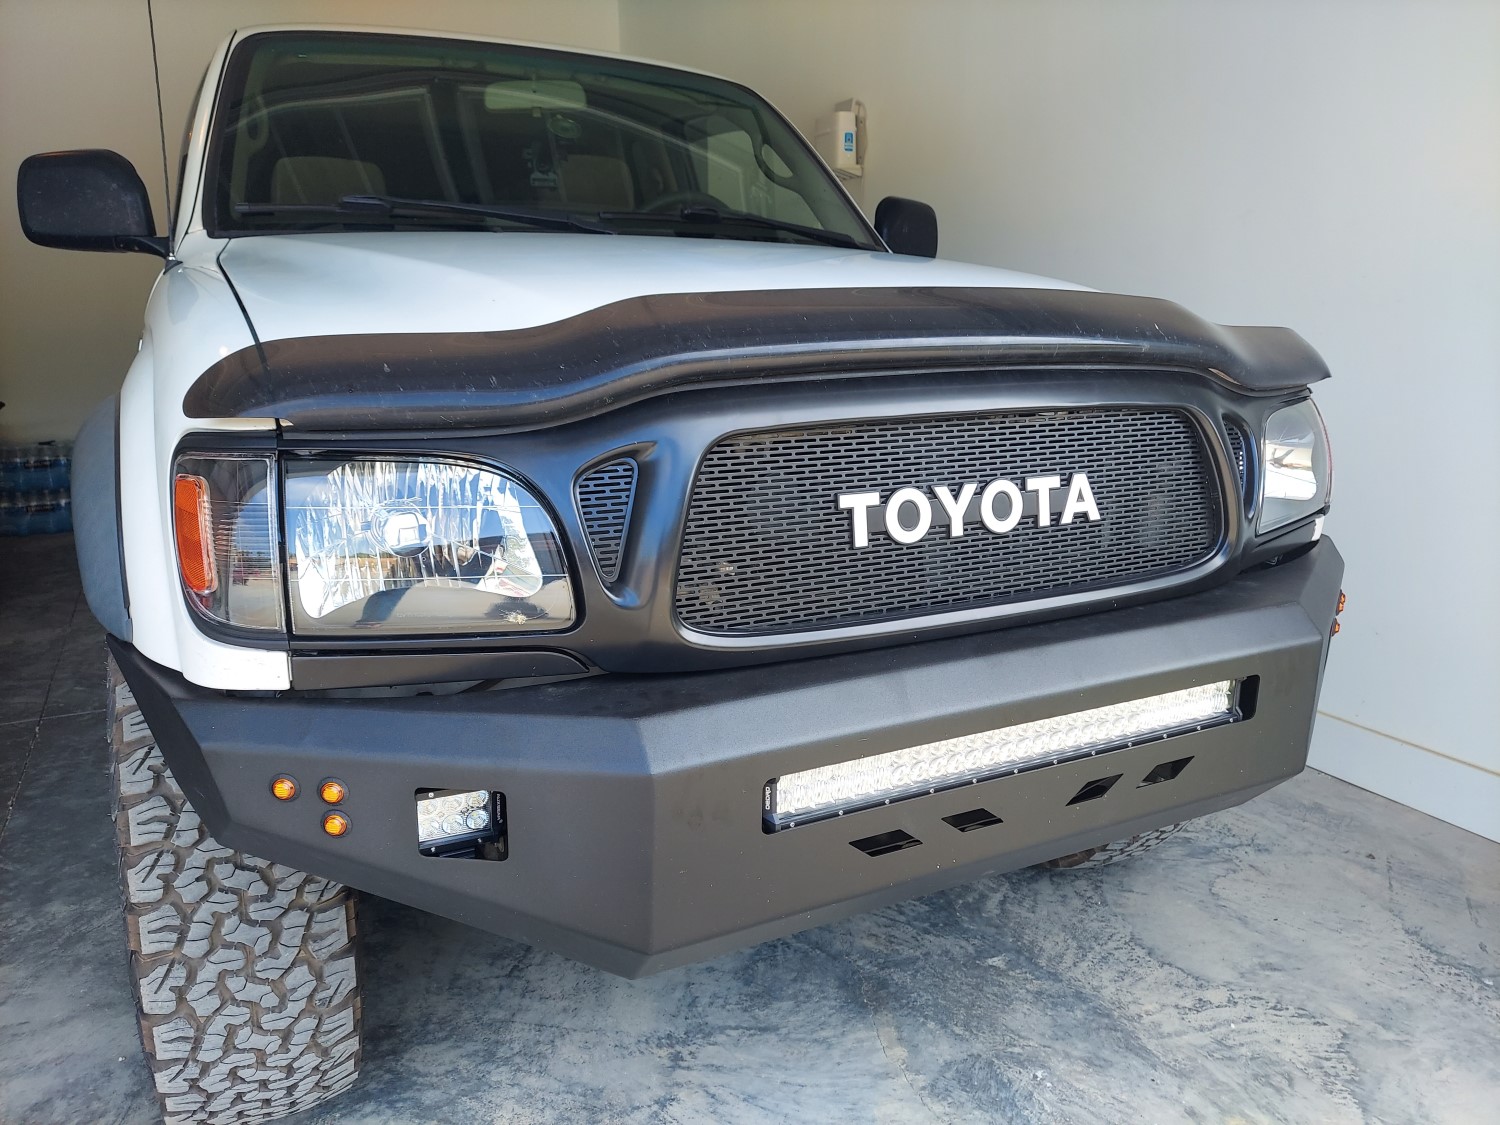 Old Truck, New Look: Upgrading Your 1st Gen Tacoma's Grille